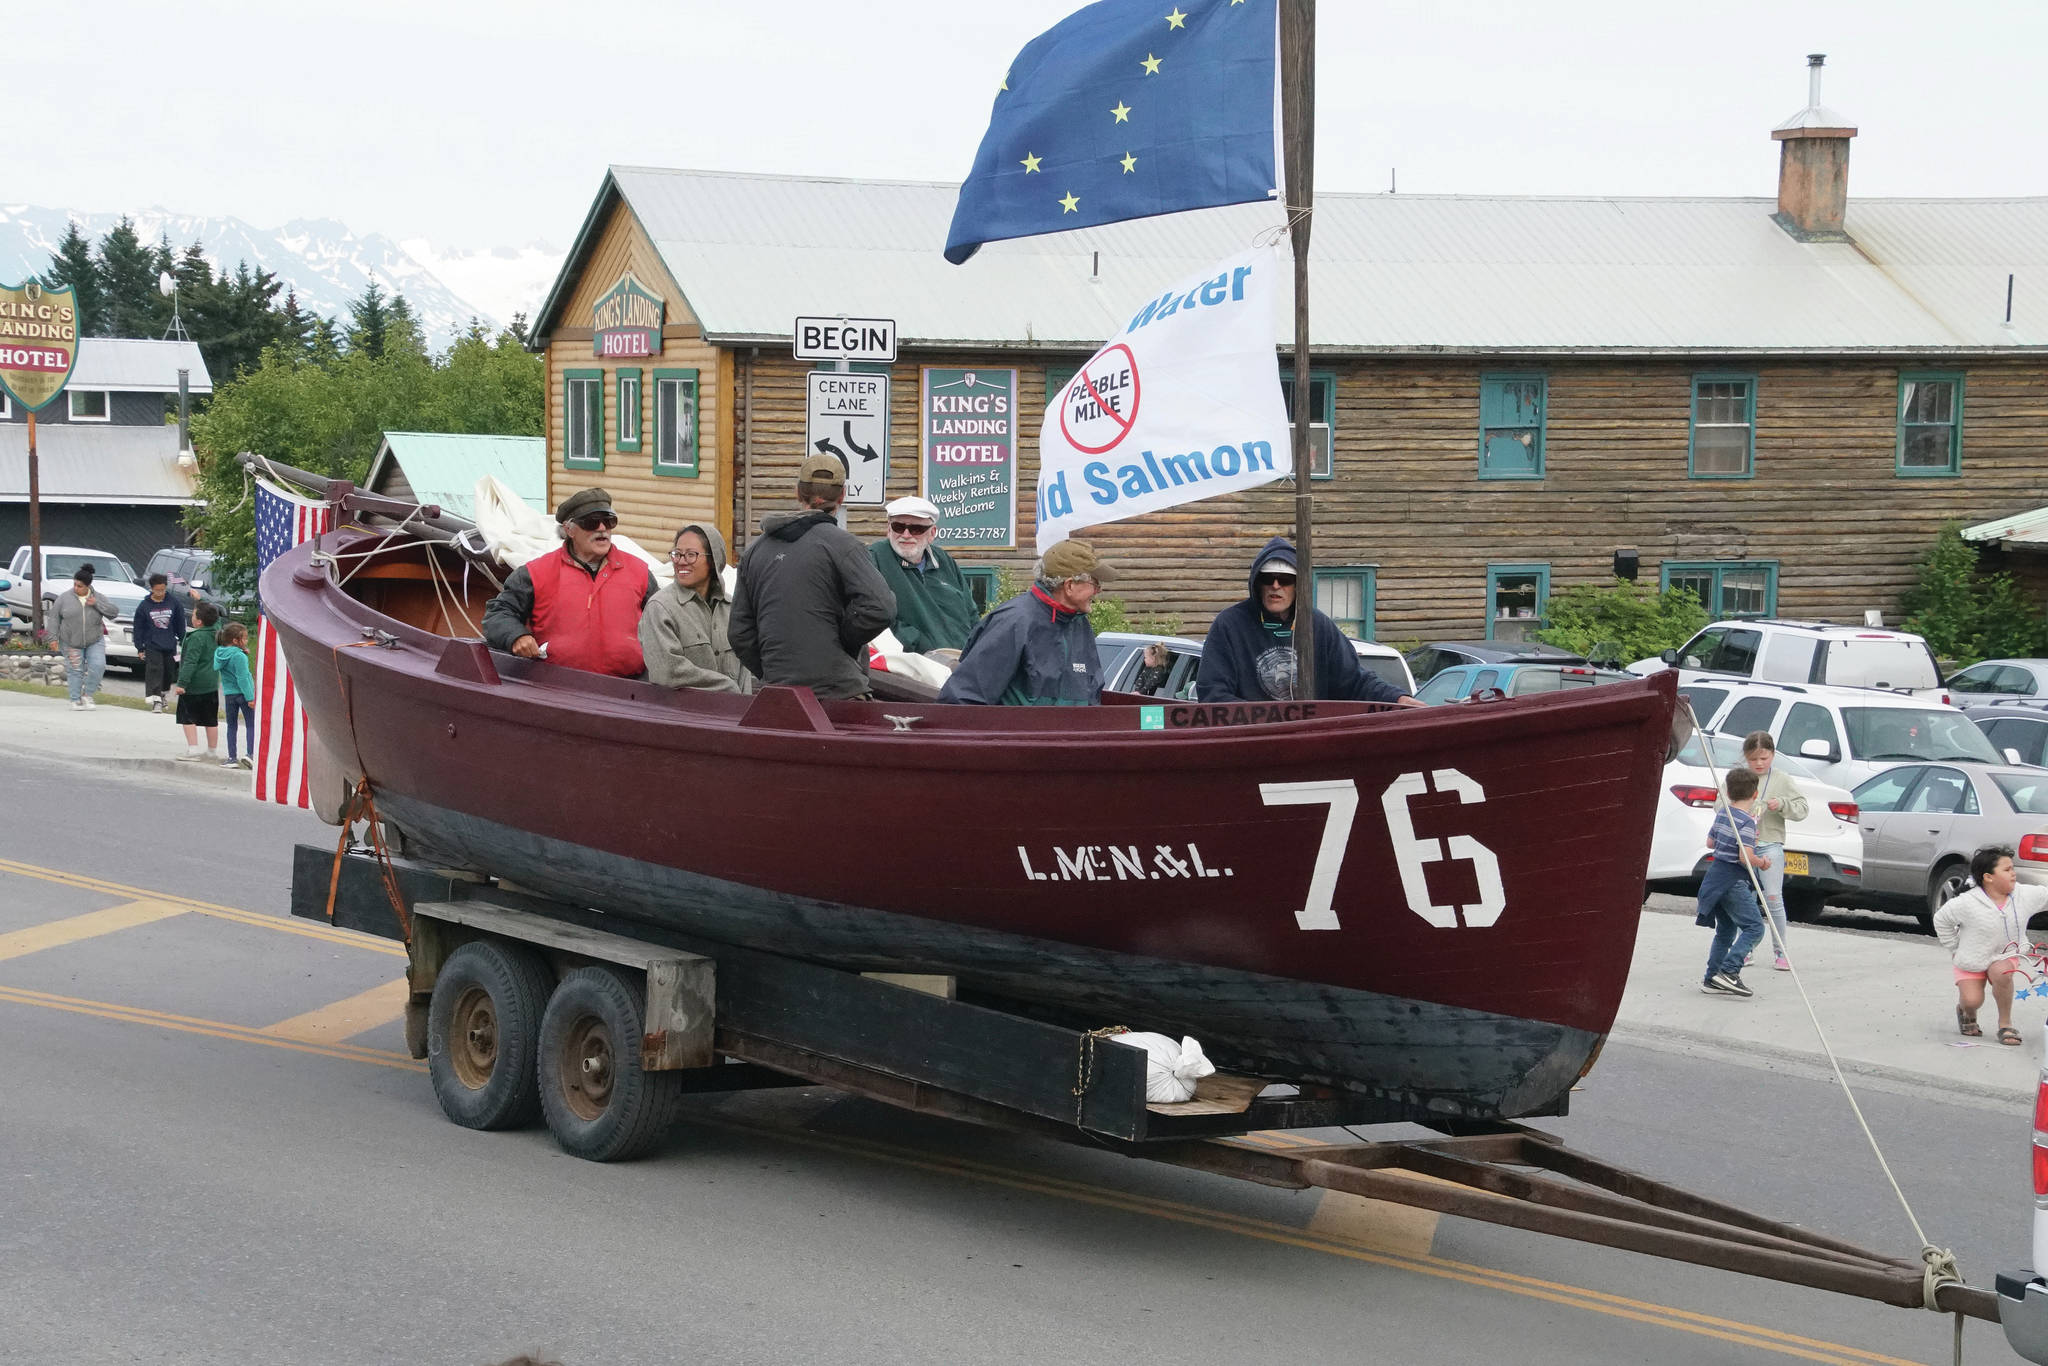 No. 76, along with Tim Troll, center, Dave Seaman, right, and friends, sails down Pioneer Avenue in Homer’s Fourth of July parade on July 4, 2021, in Homer, Alaska. (Photo by Ben Mitchell)